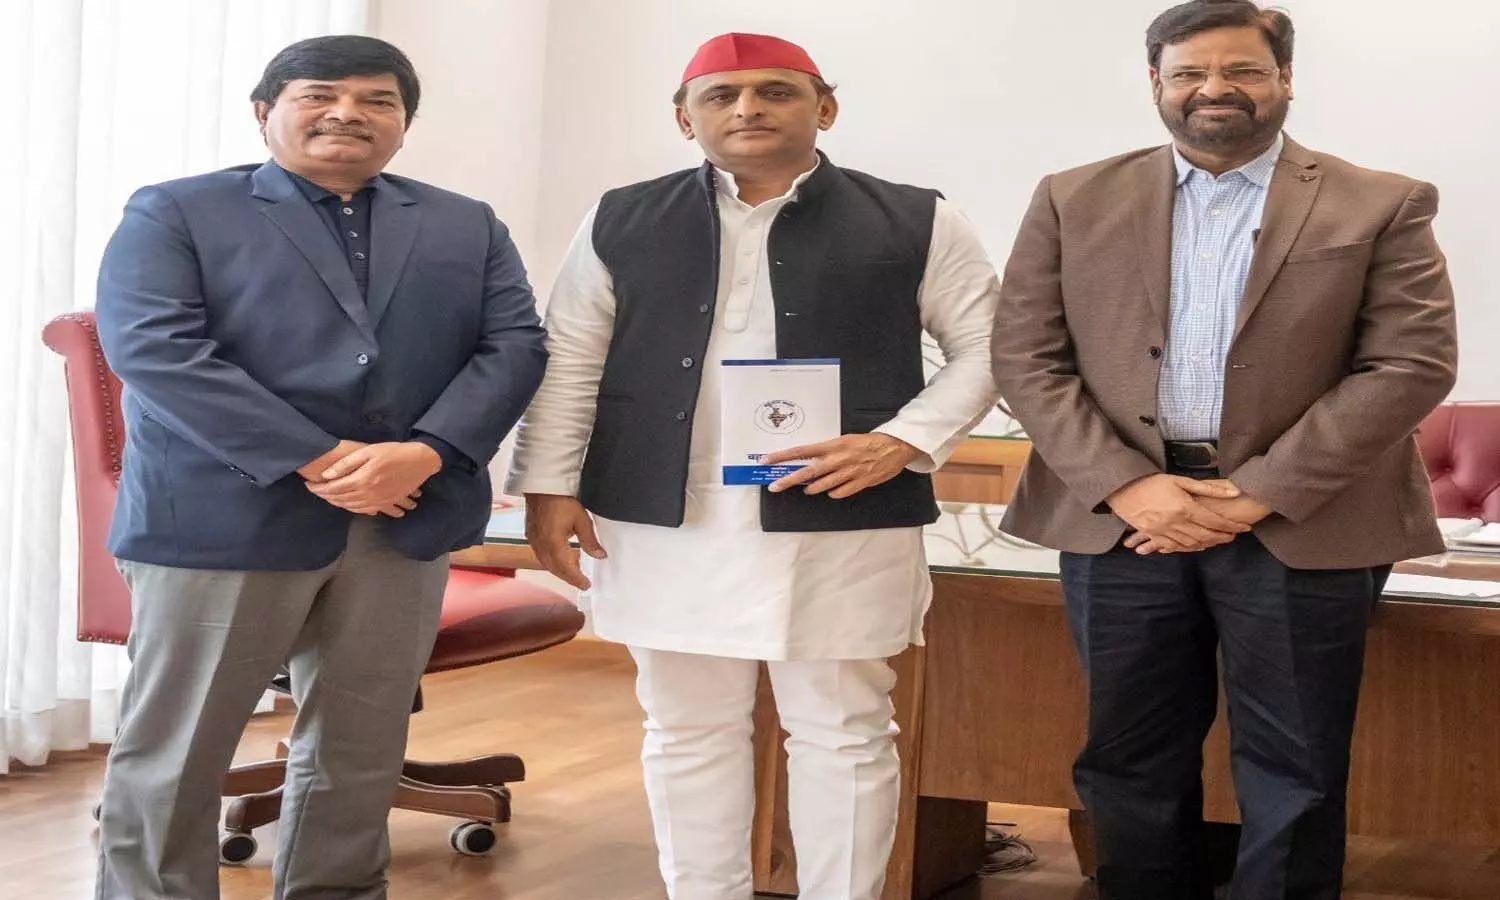 UP Election 2022: Akhilesh gives another blow to BSP before voting, Mayawatis special former IAS Fateh Bahadur Singh joins SP